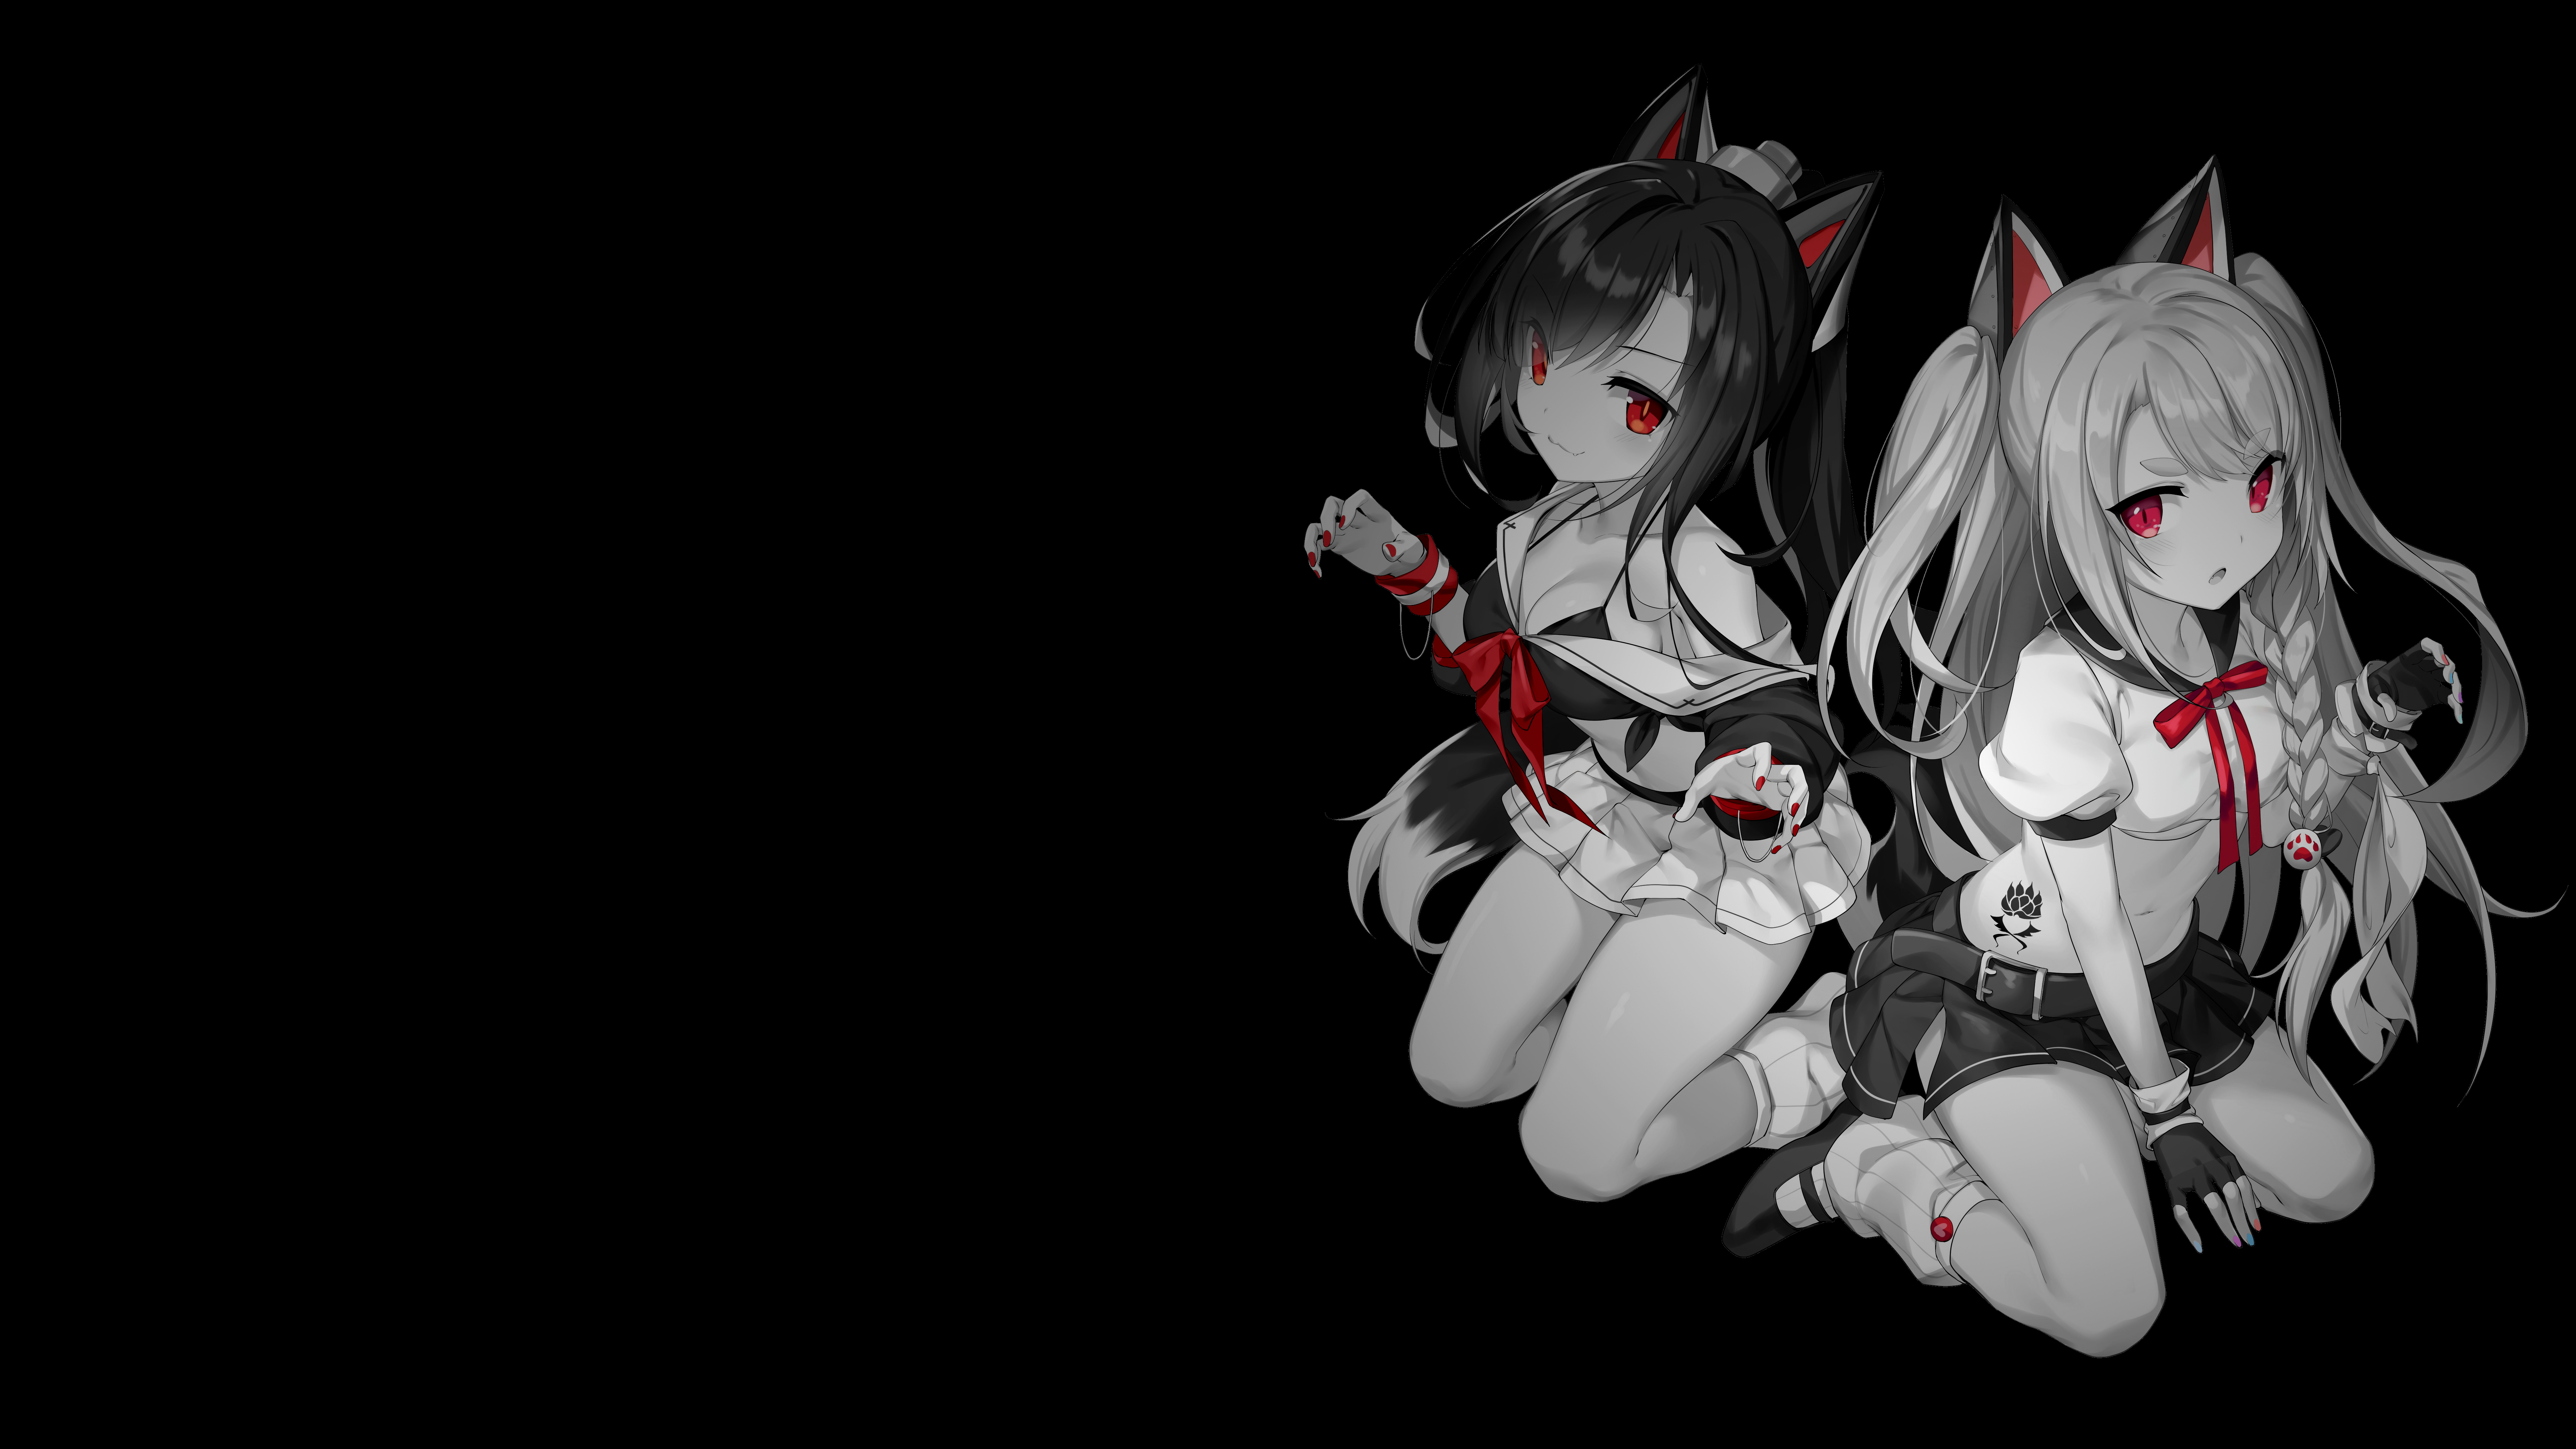 Anime 7767x4369 selective coloring anime girls simple background dark background black background cat girl cat ears cat tail